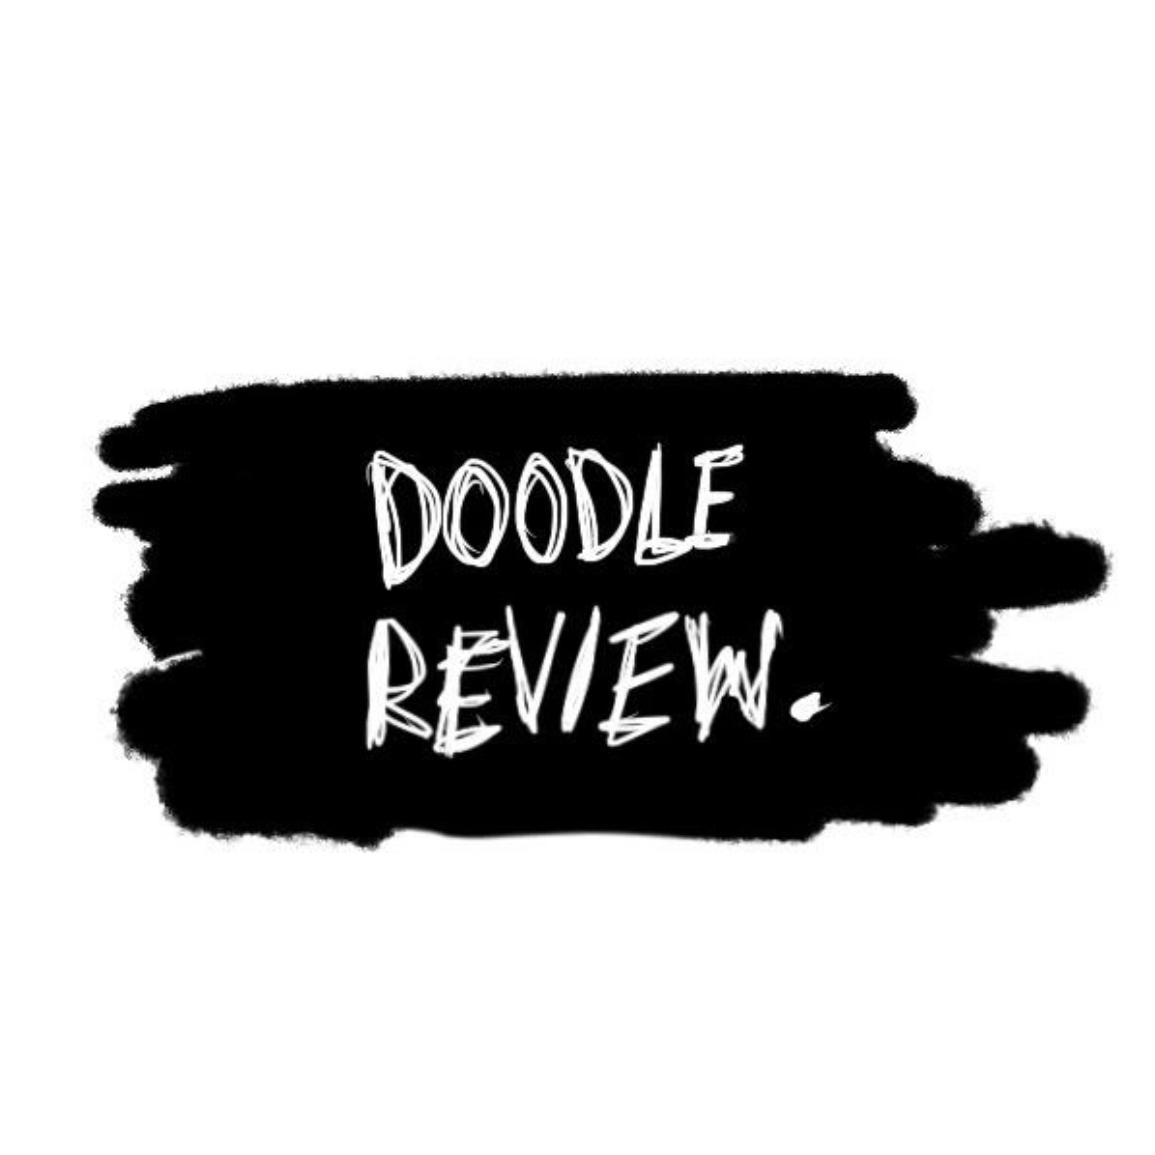 DoodleReview's images